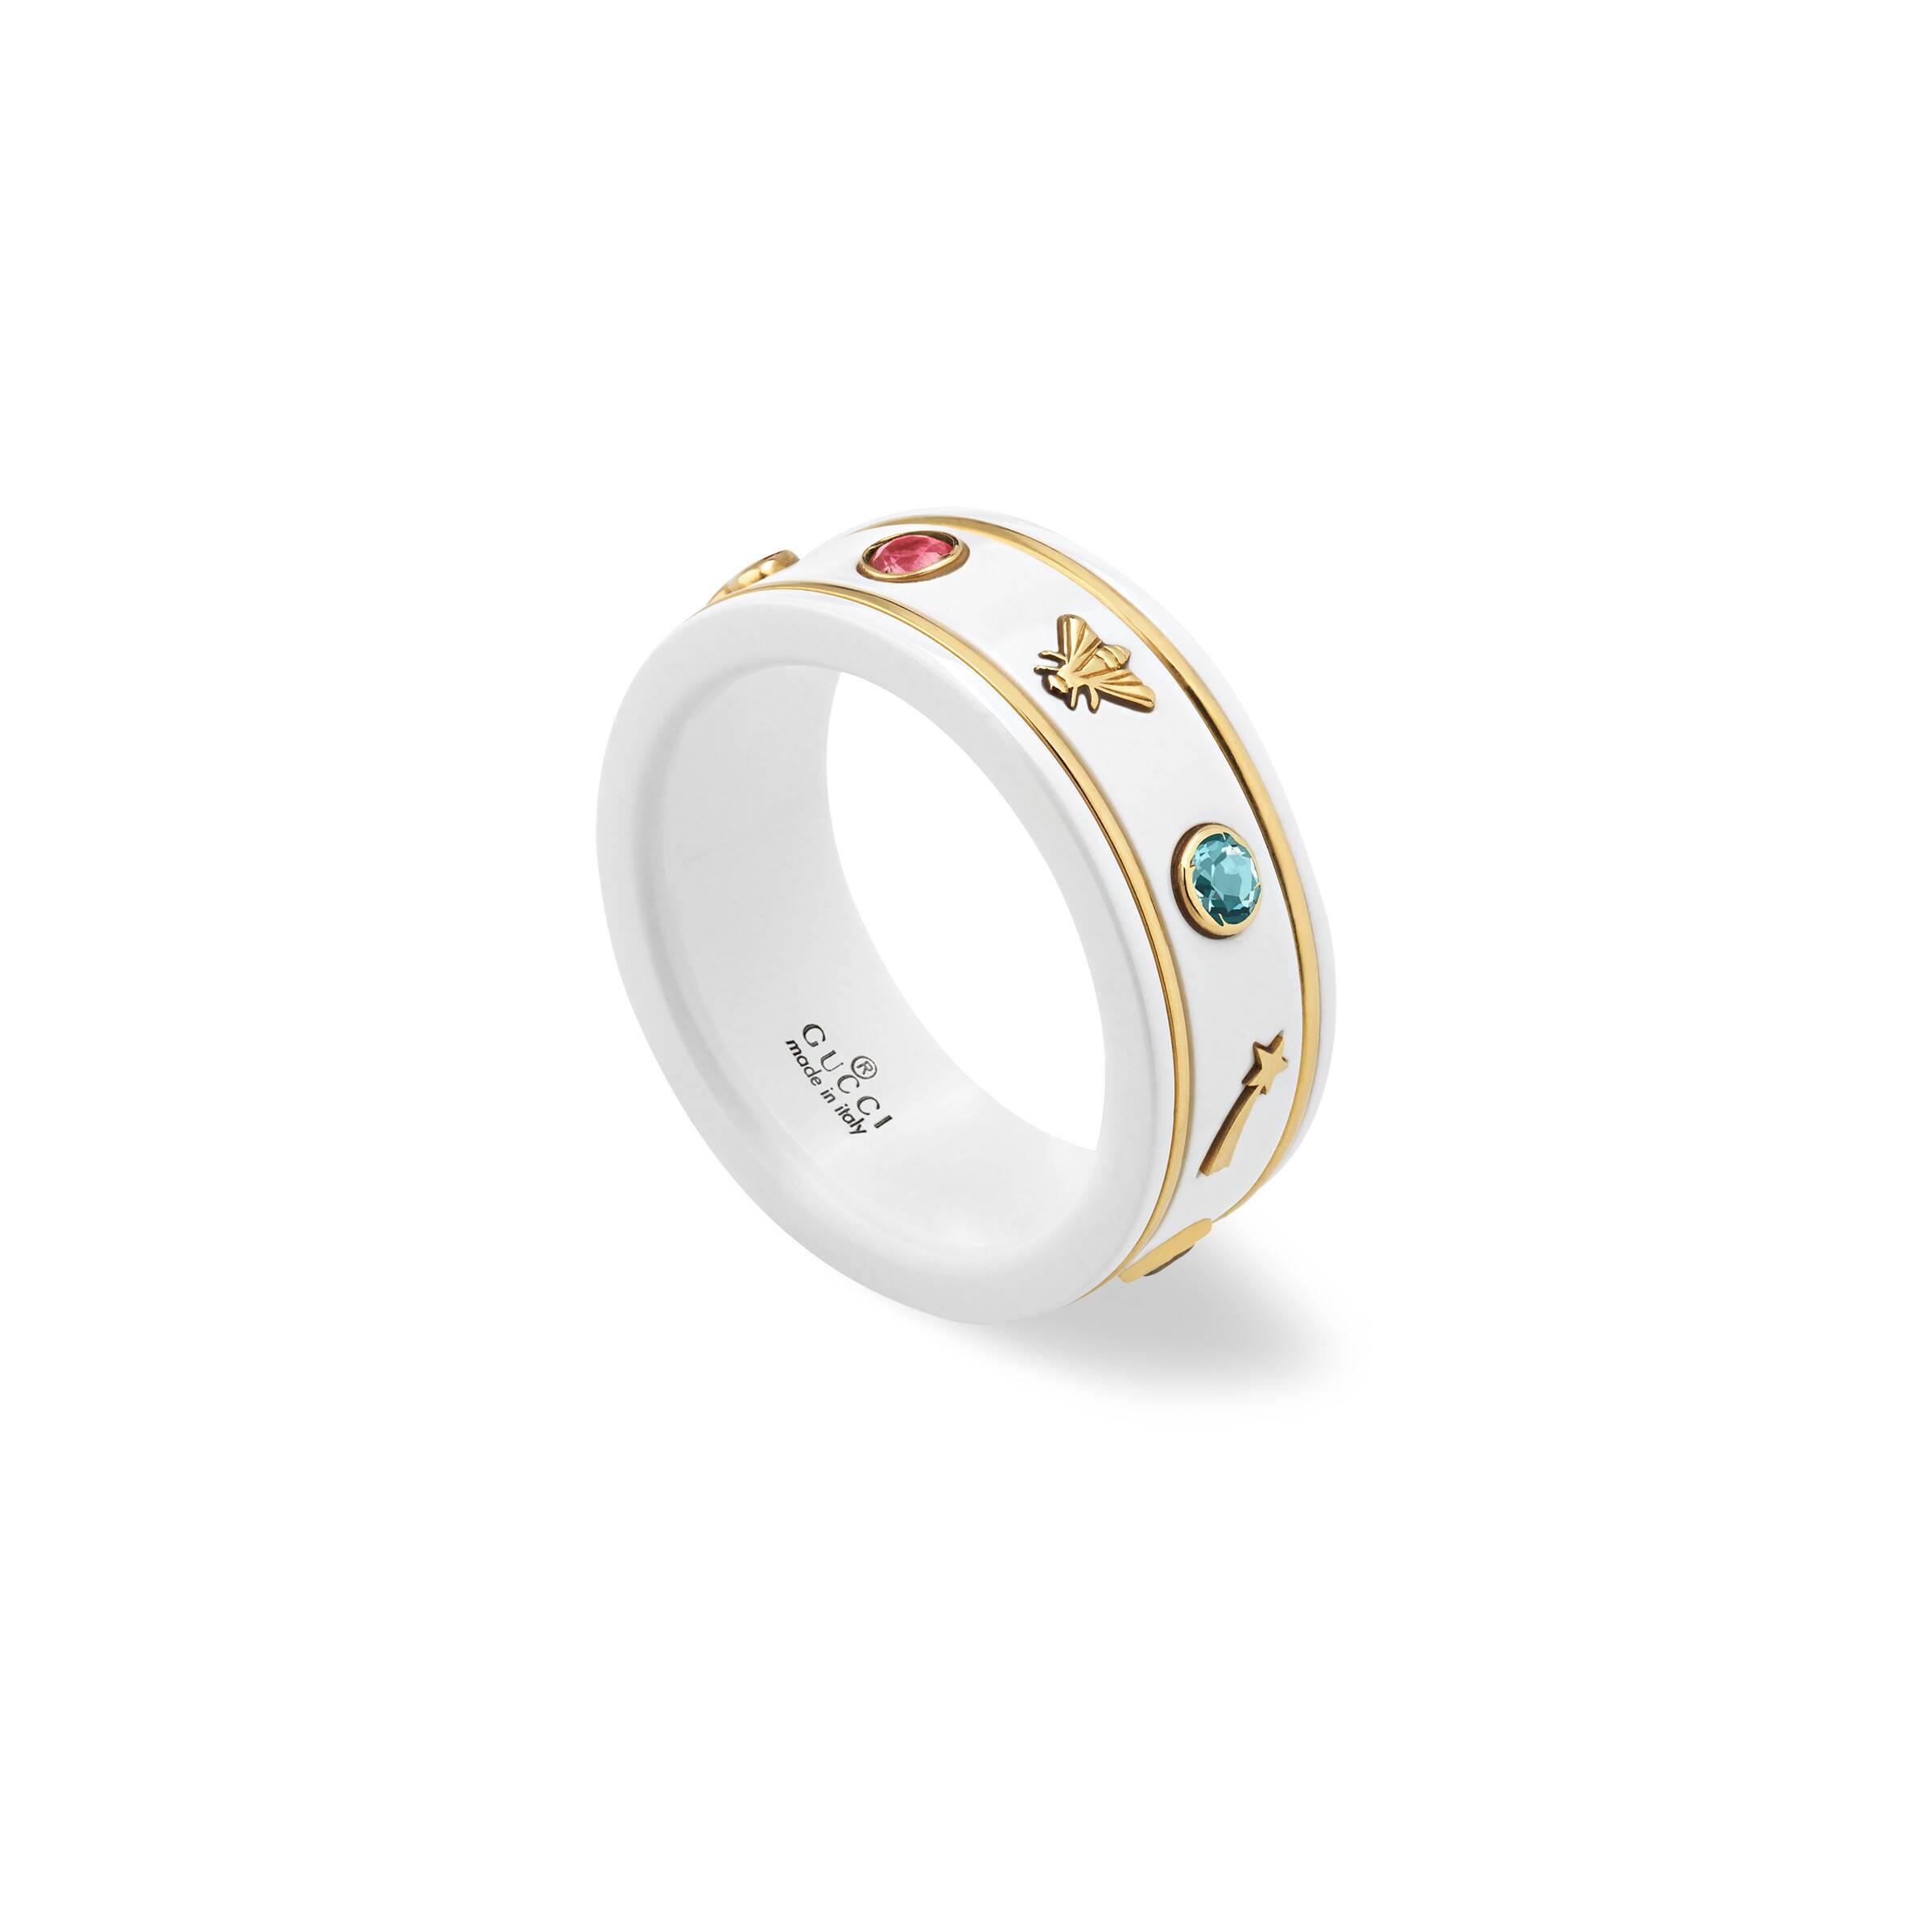 icon ring with gemstones gucci